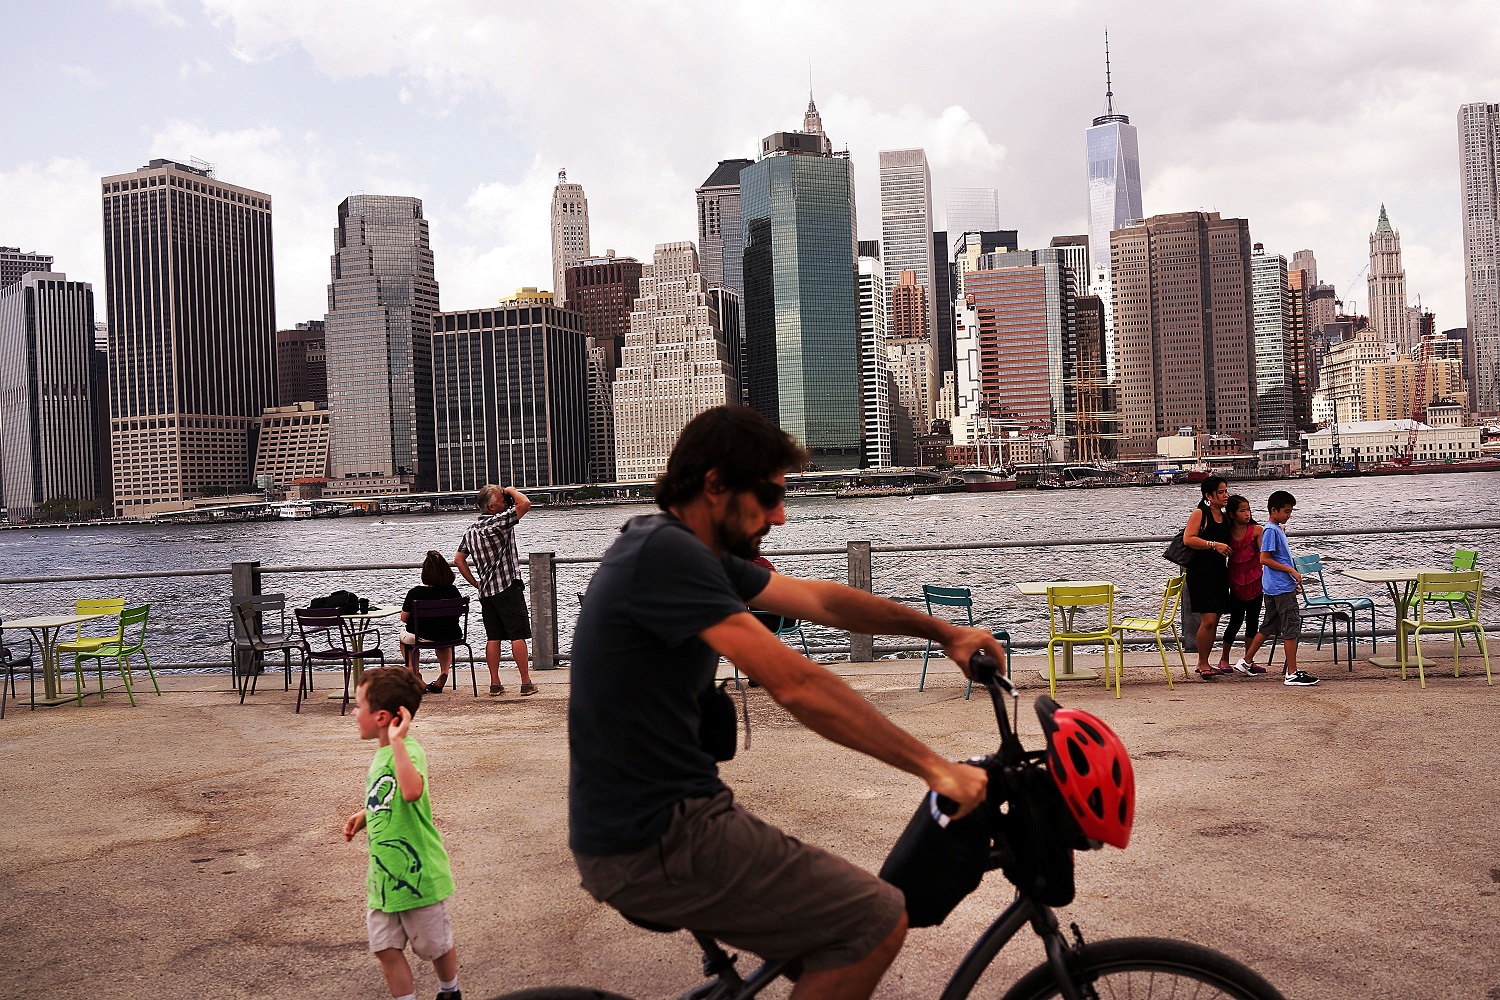 The Manhattan skyline is seen in the background as people relax in the Brooklyn Bridge Park in the Brooklyn borough of New York City. Photographer: Spencer Platt/Getty Images